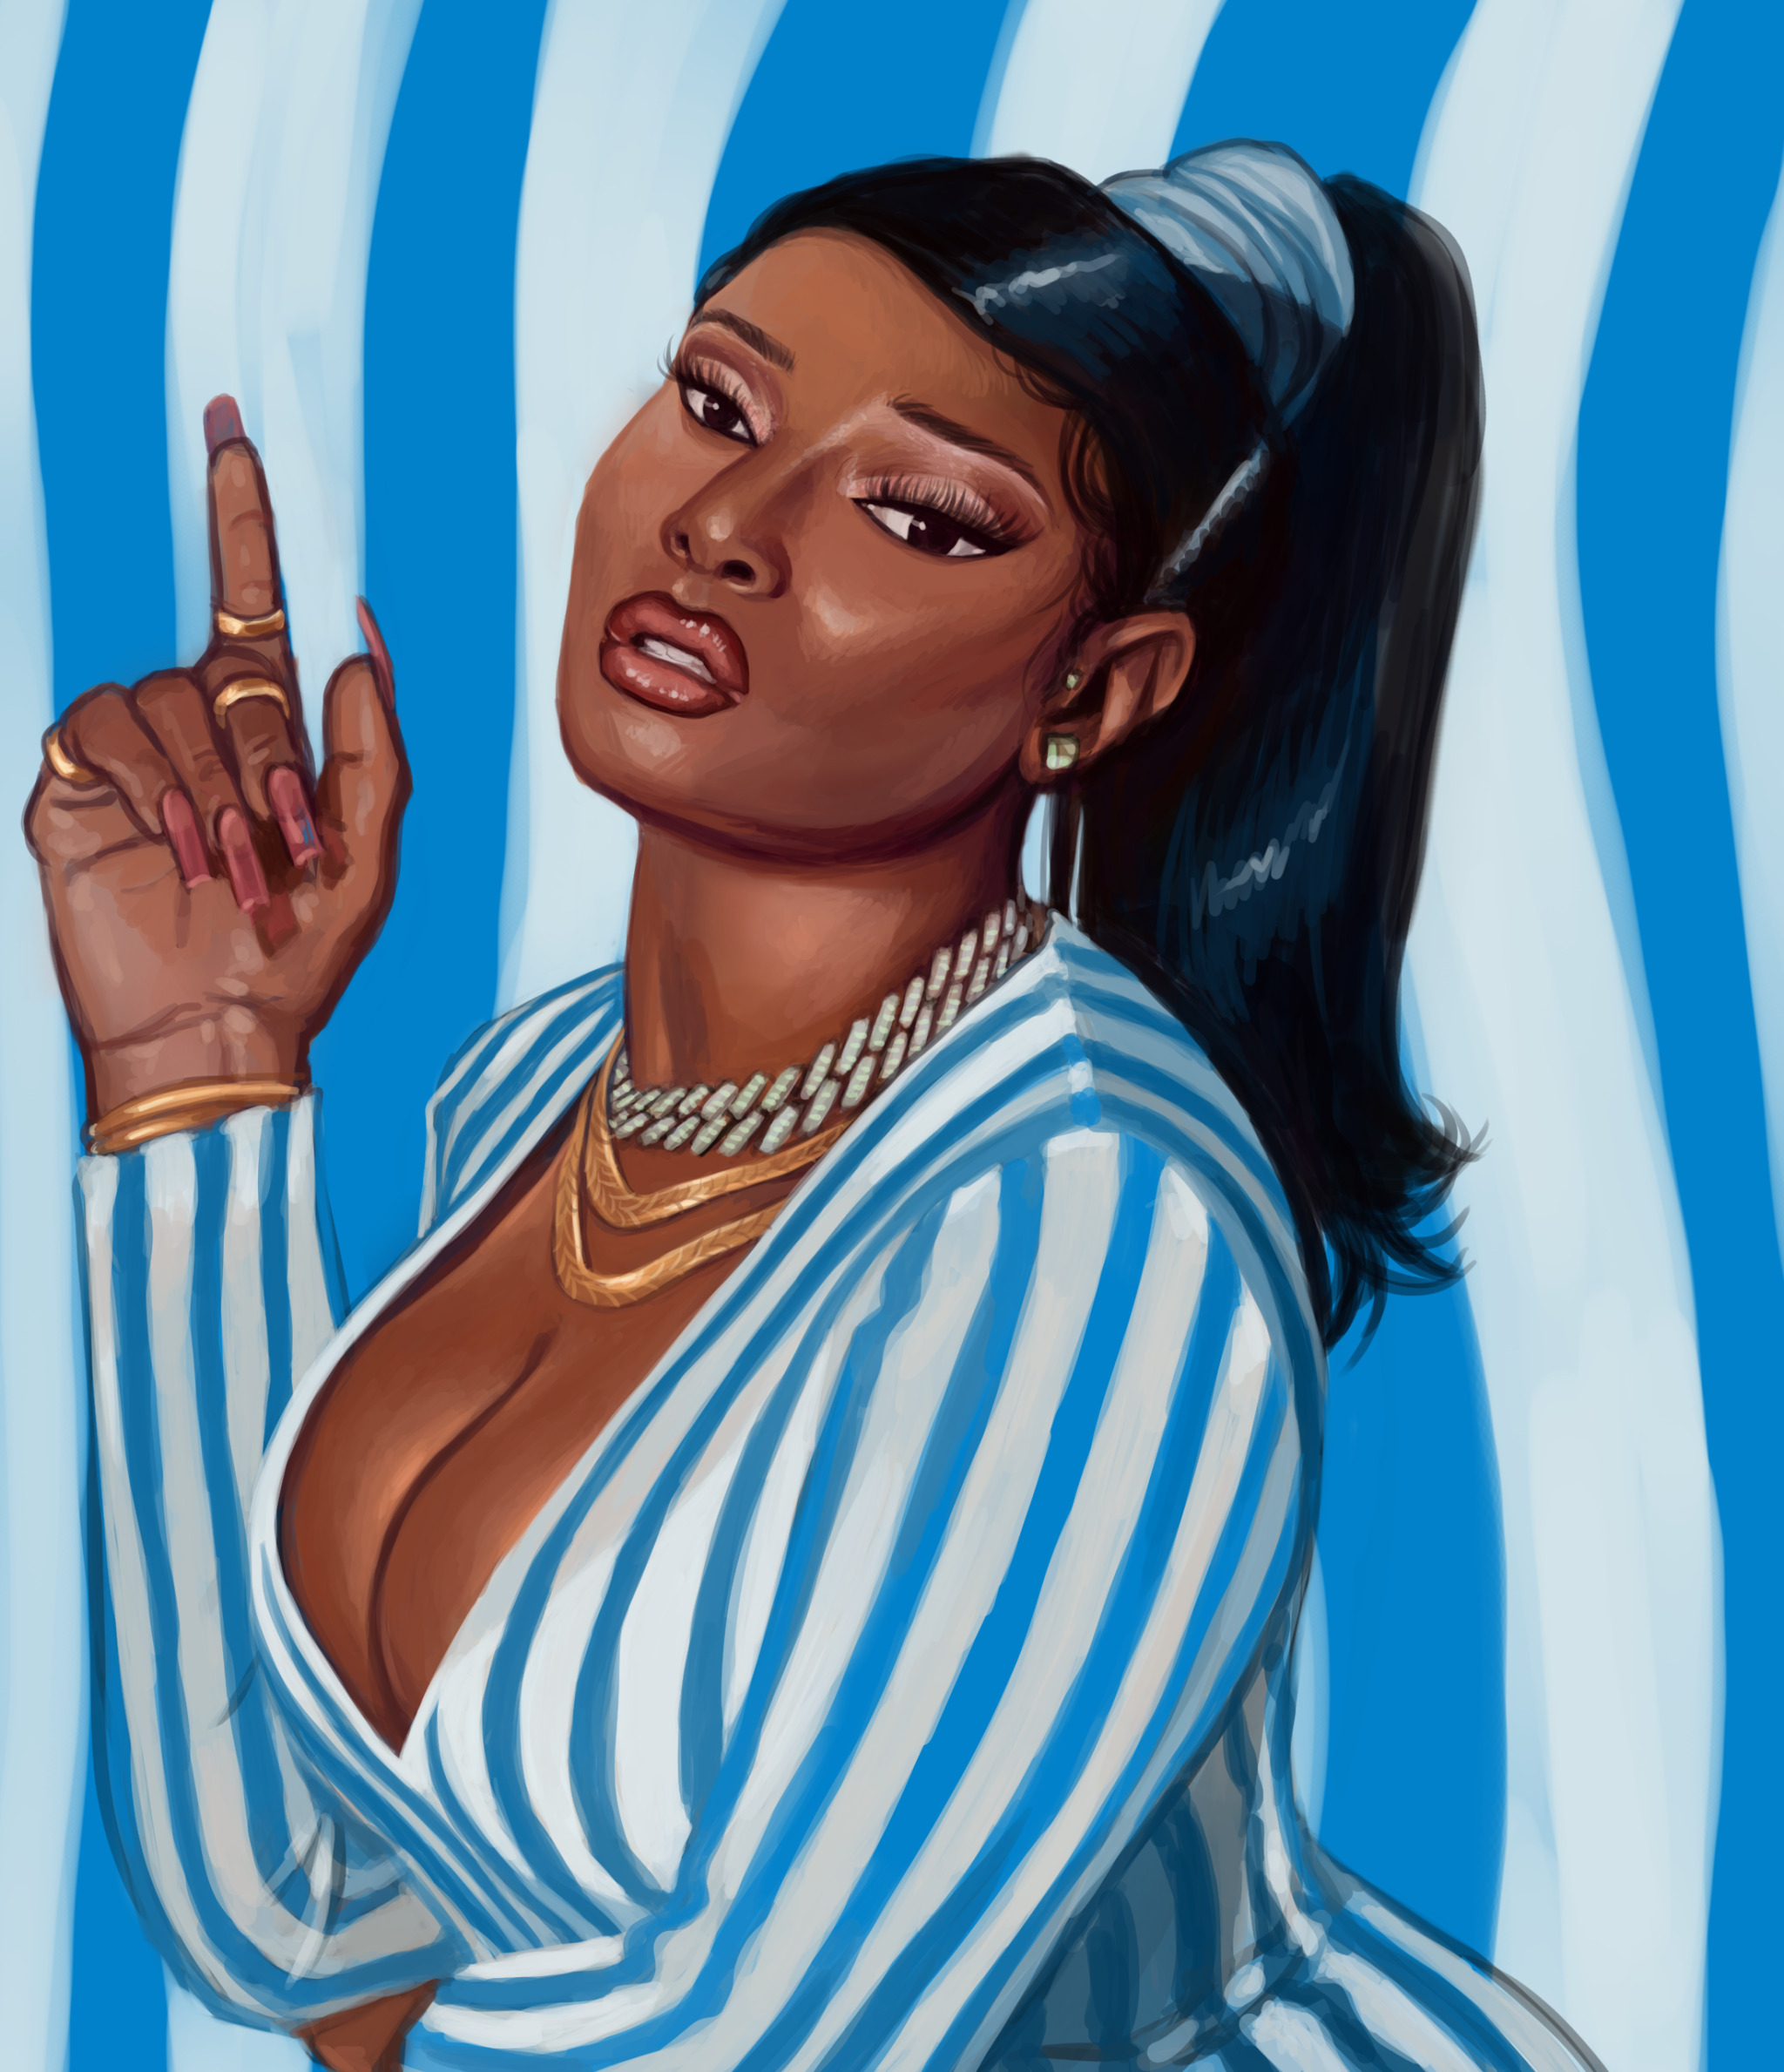 Digital painting of Megan Thee Stallion in a white and blue pinstriped dress in front of a blue and white striped background